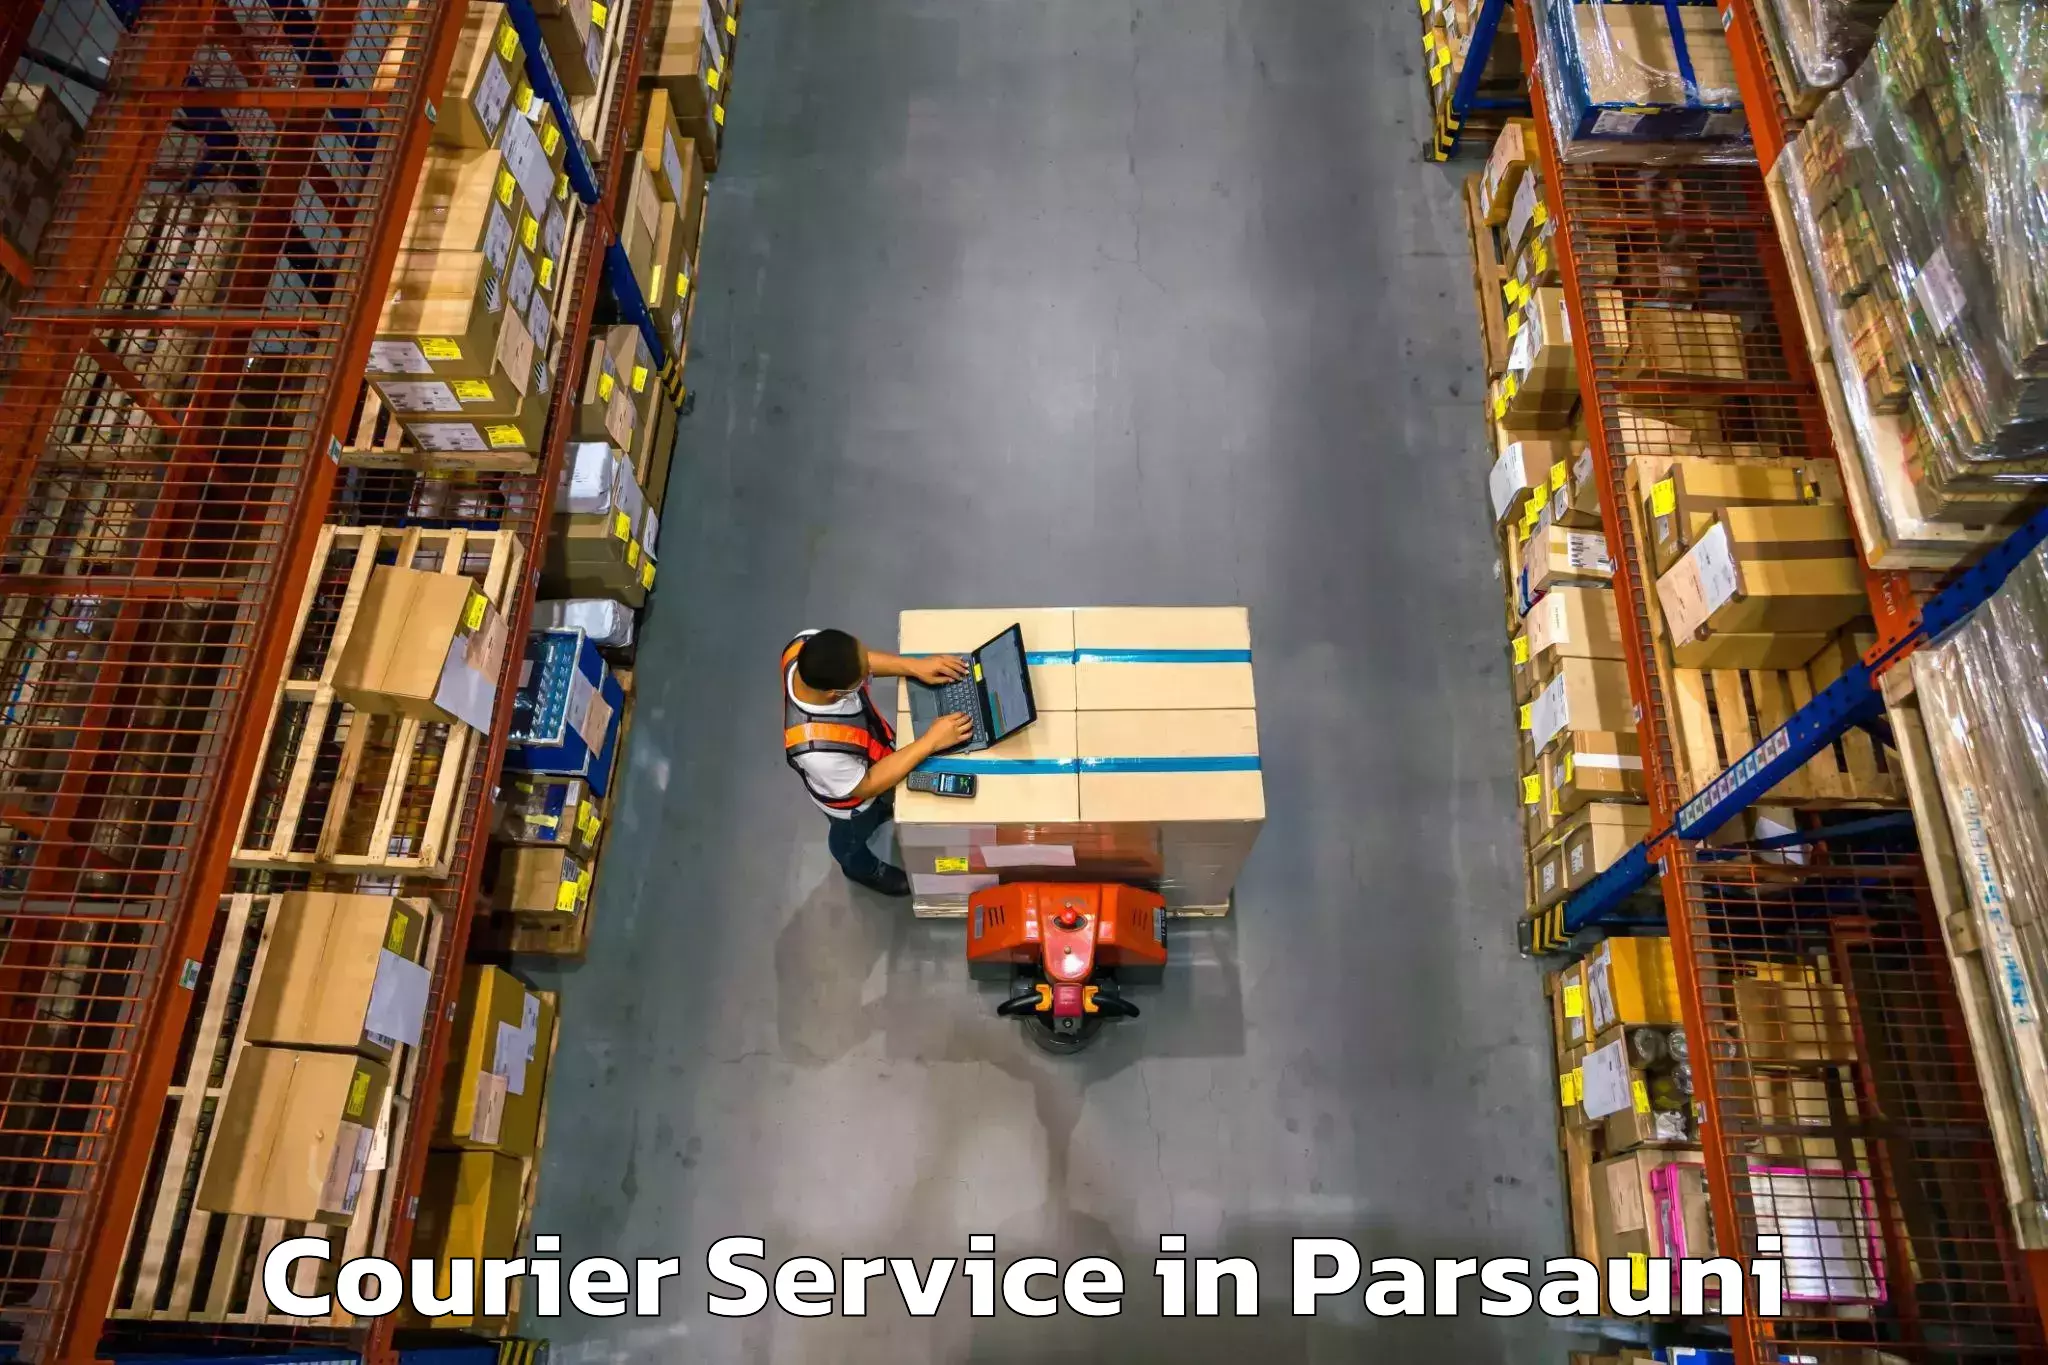 Secure package delivery in Parsauni